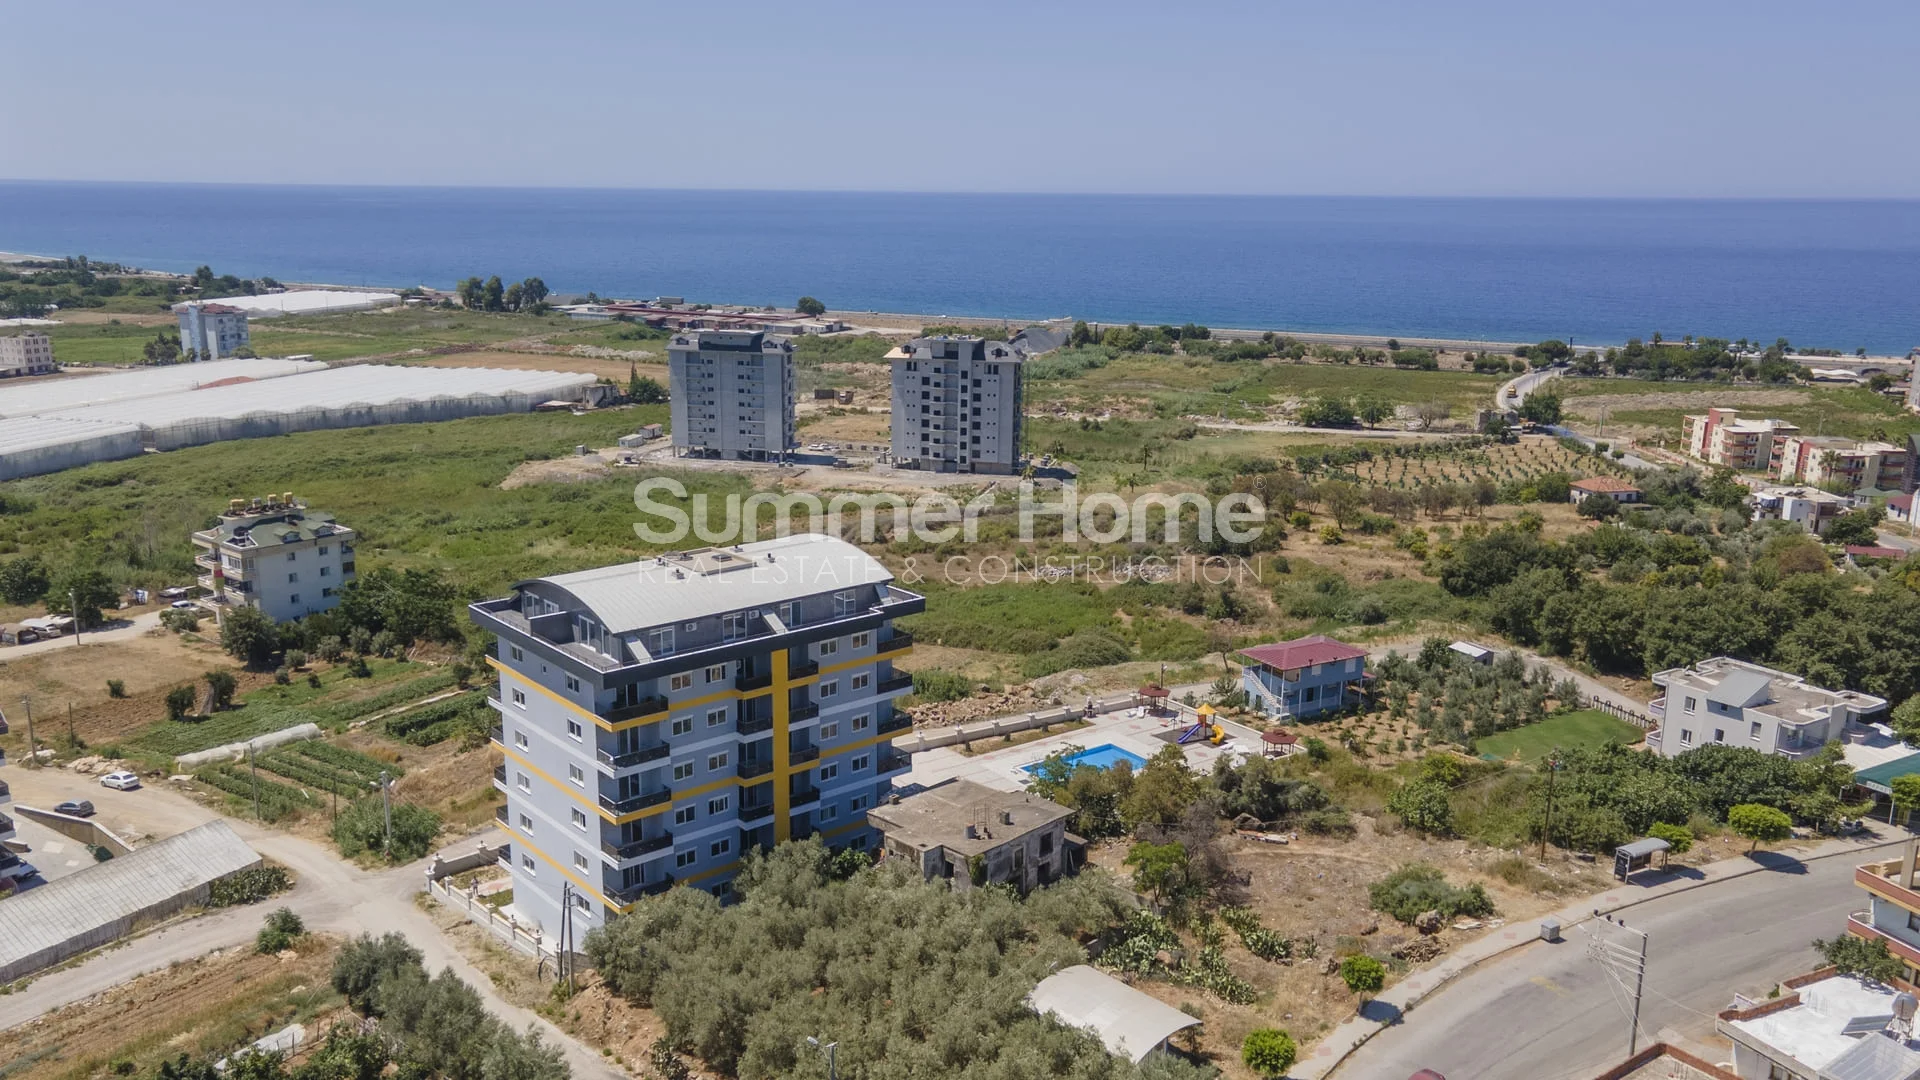 Lovely Sea View Apartments in Demirtas general - 5